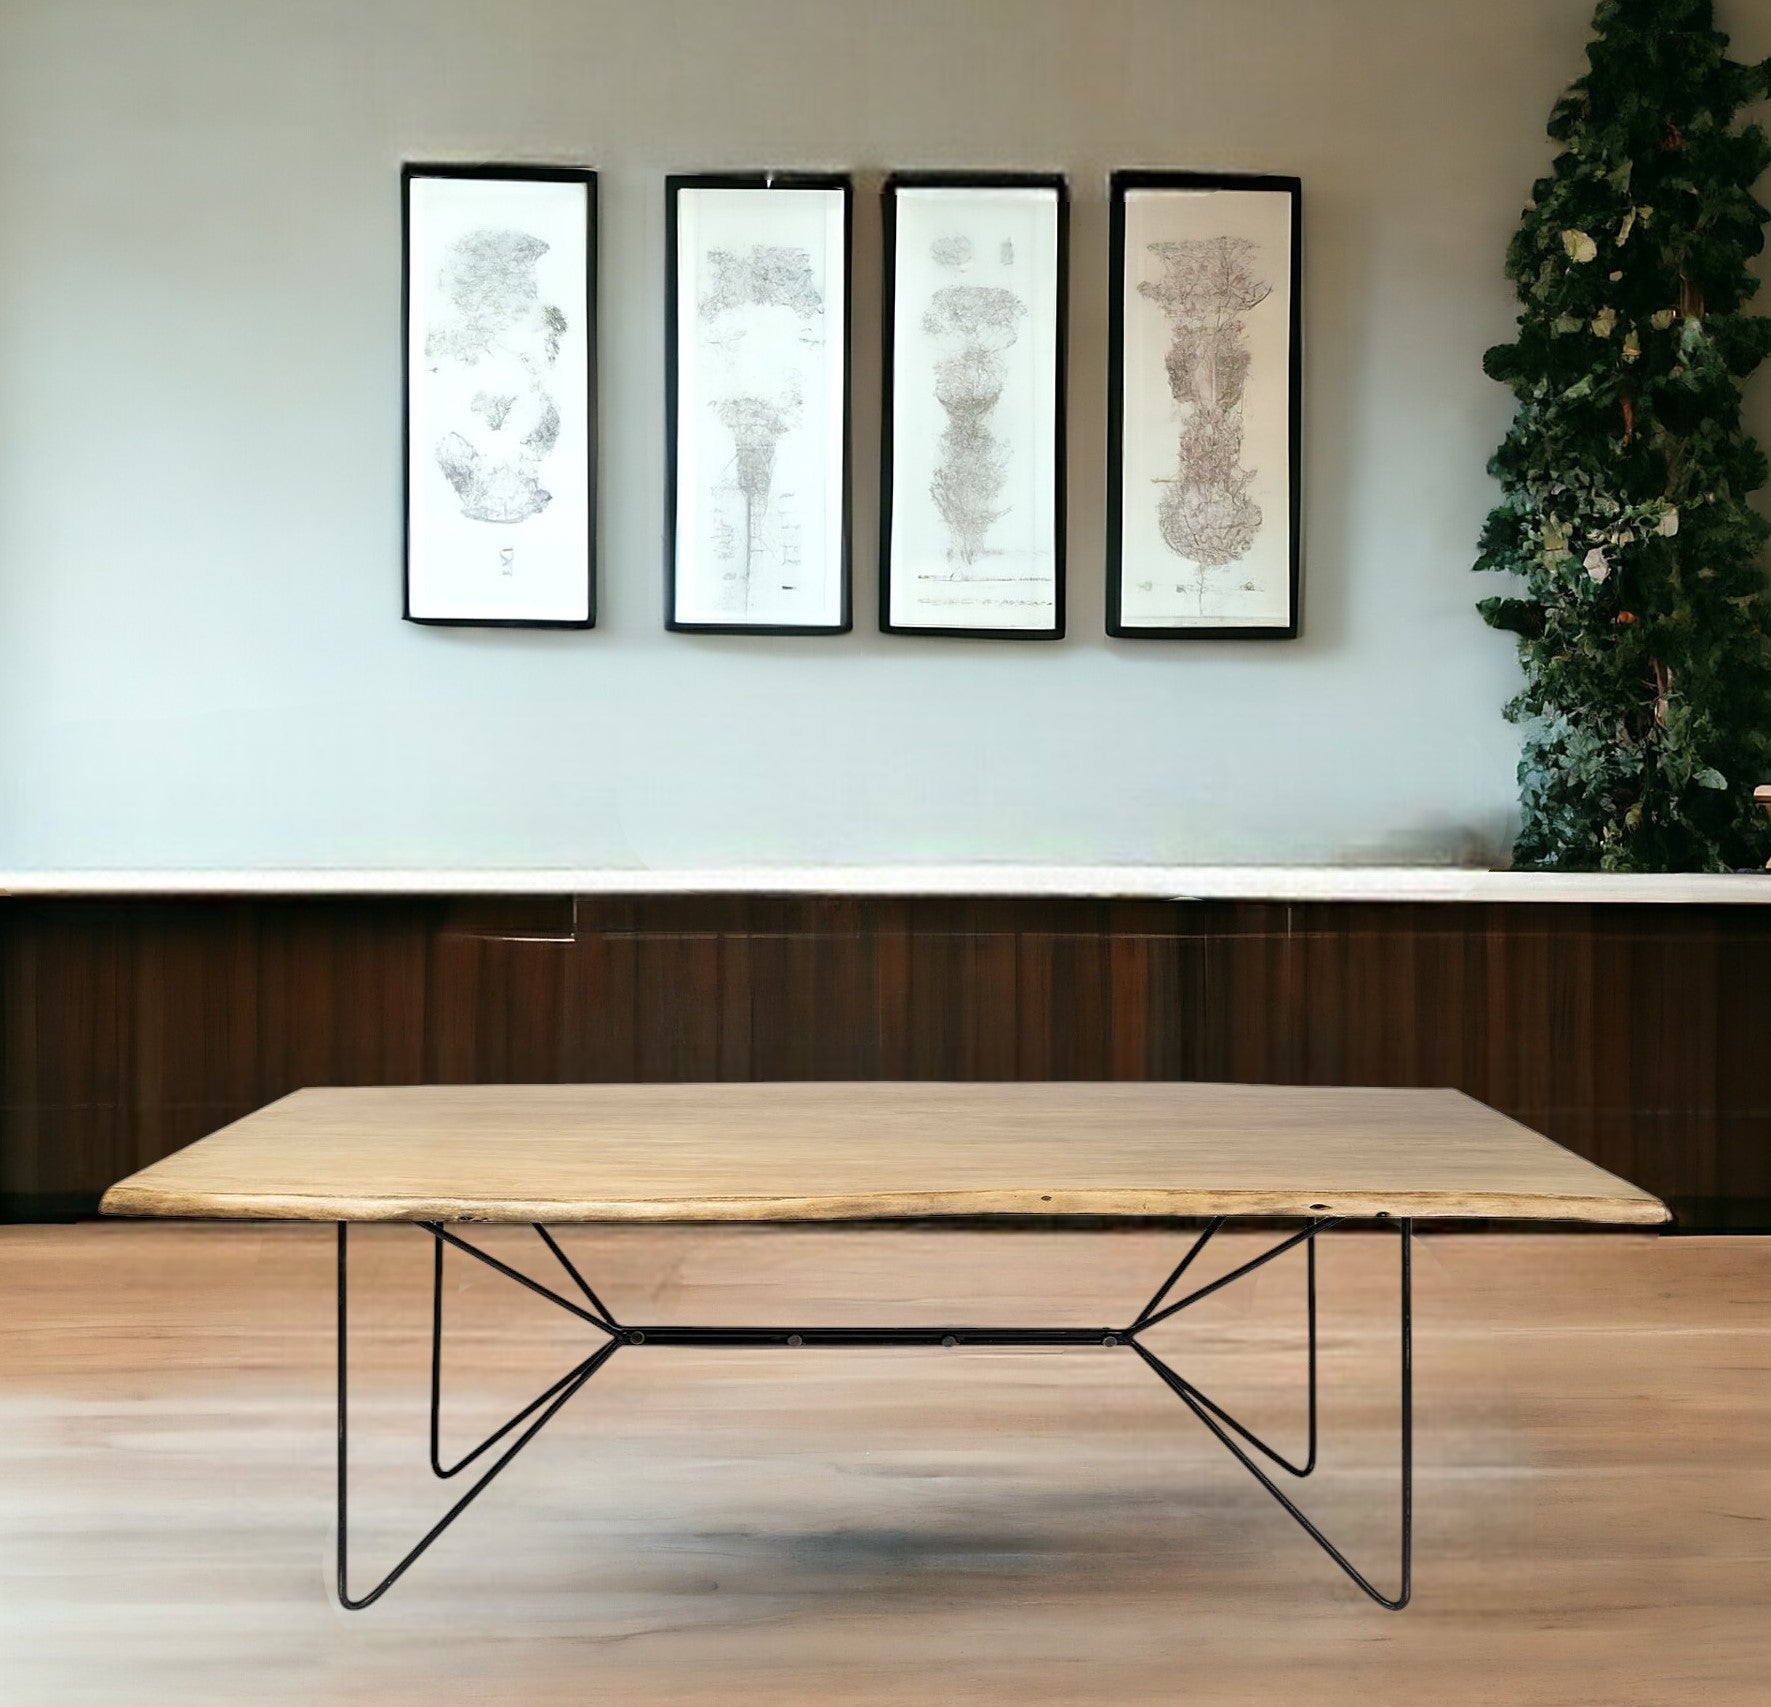 40" Brown And Black Solid Wood And Metal Dining Table